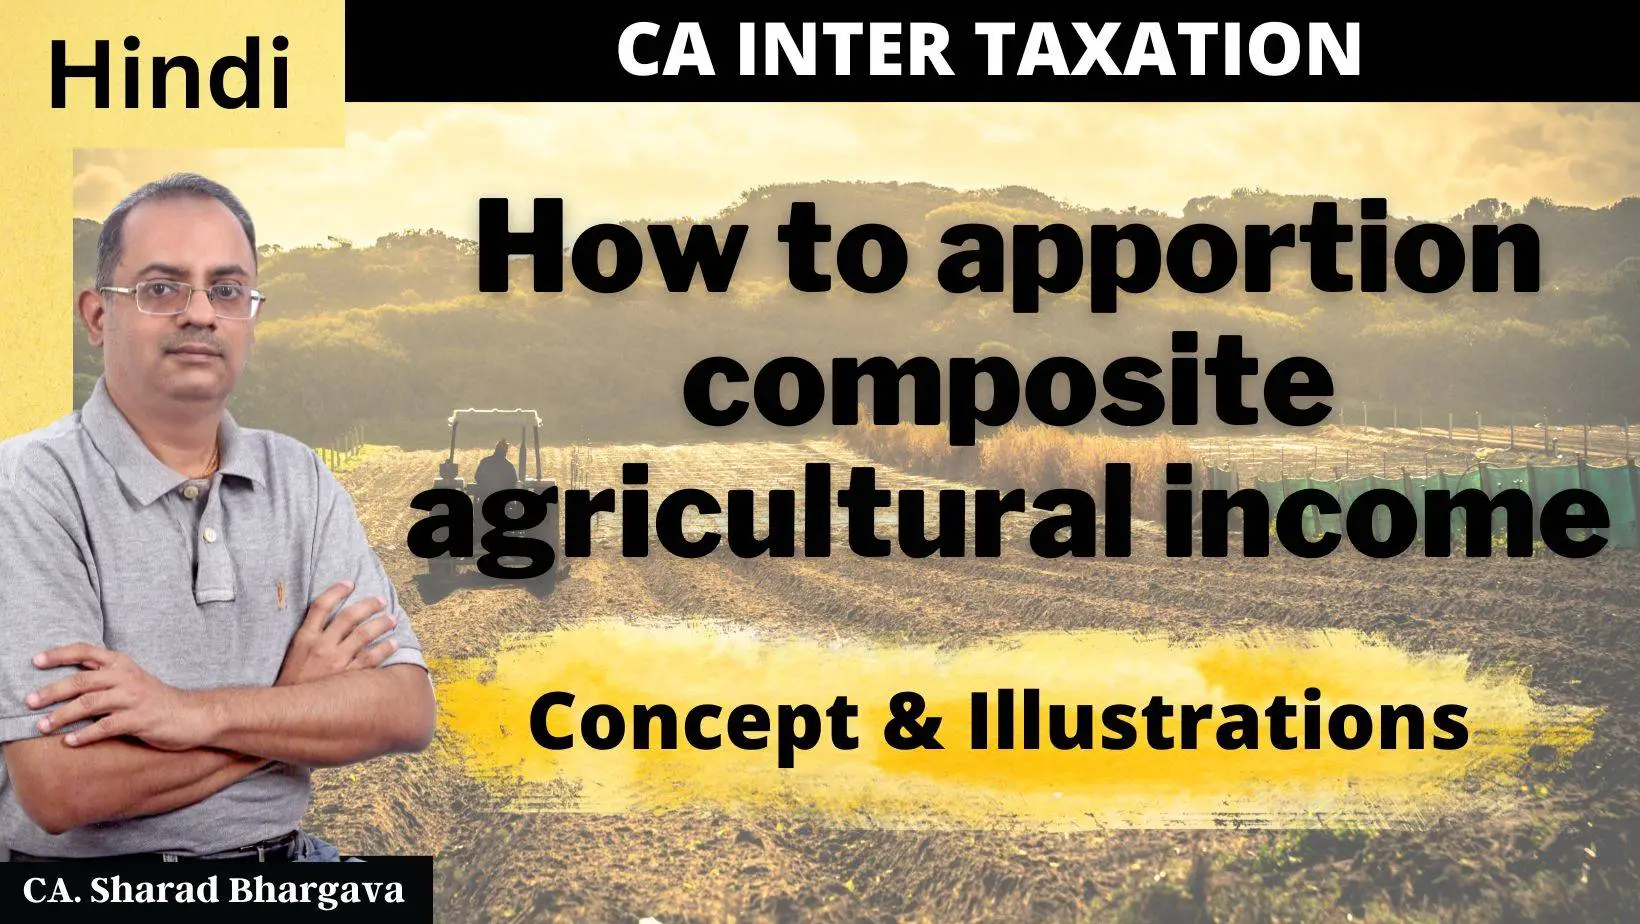 (Hindi) / Apportion composite agricultural income into exempt & taxable income / CA. Sharad Bhargava